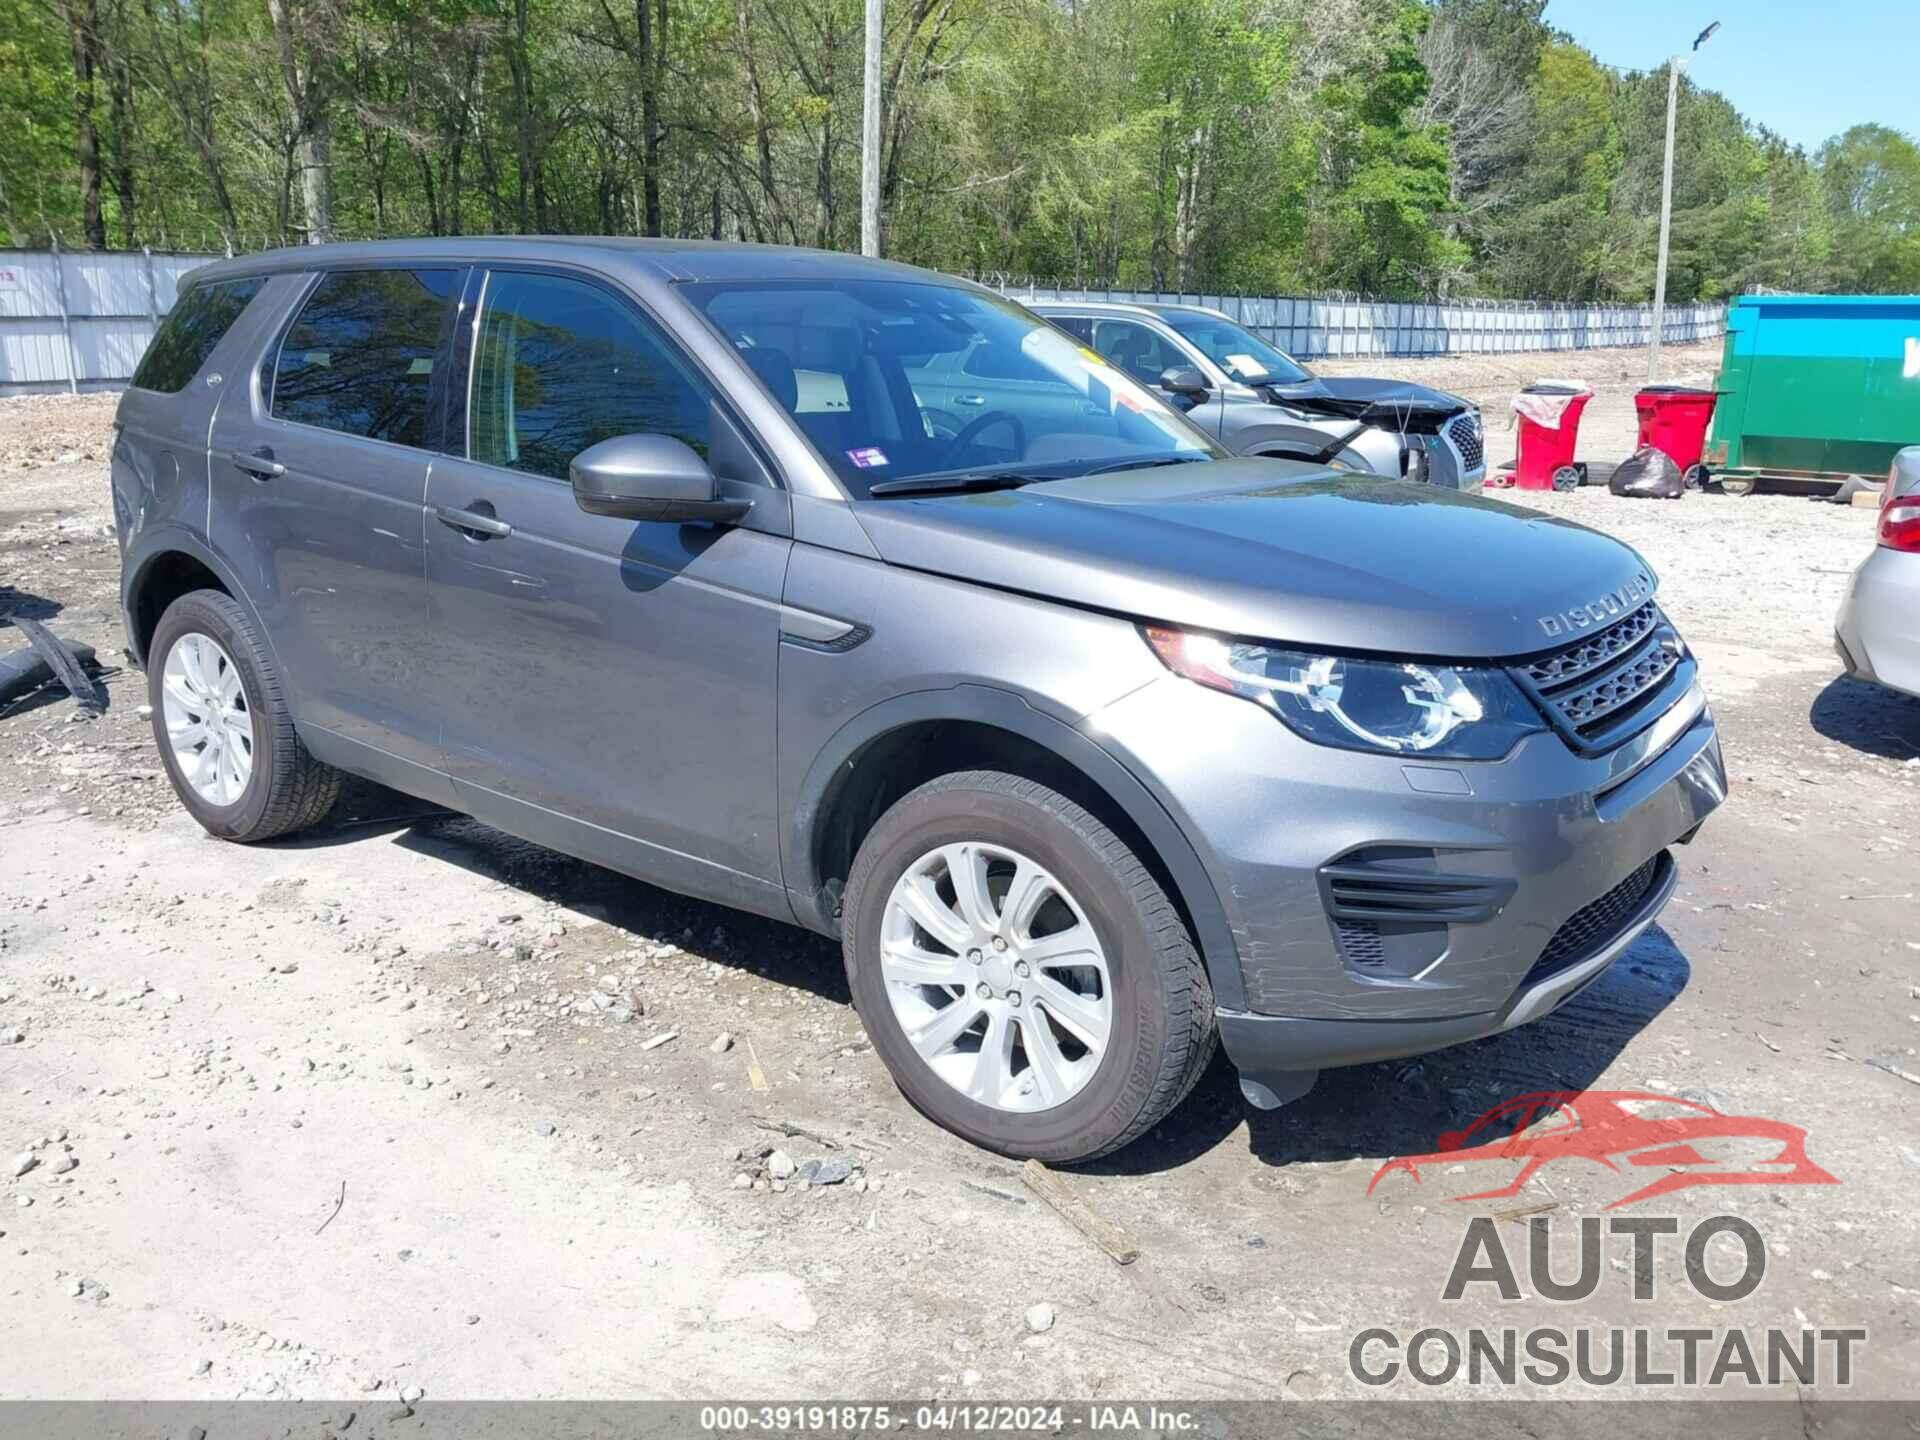 LAND ROVER DISCOVERY SPORT 2018 - SALCP2RXXJH769671